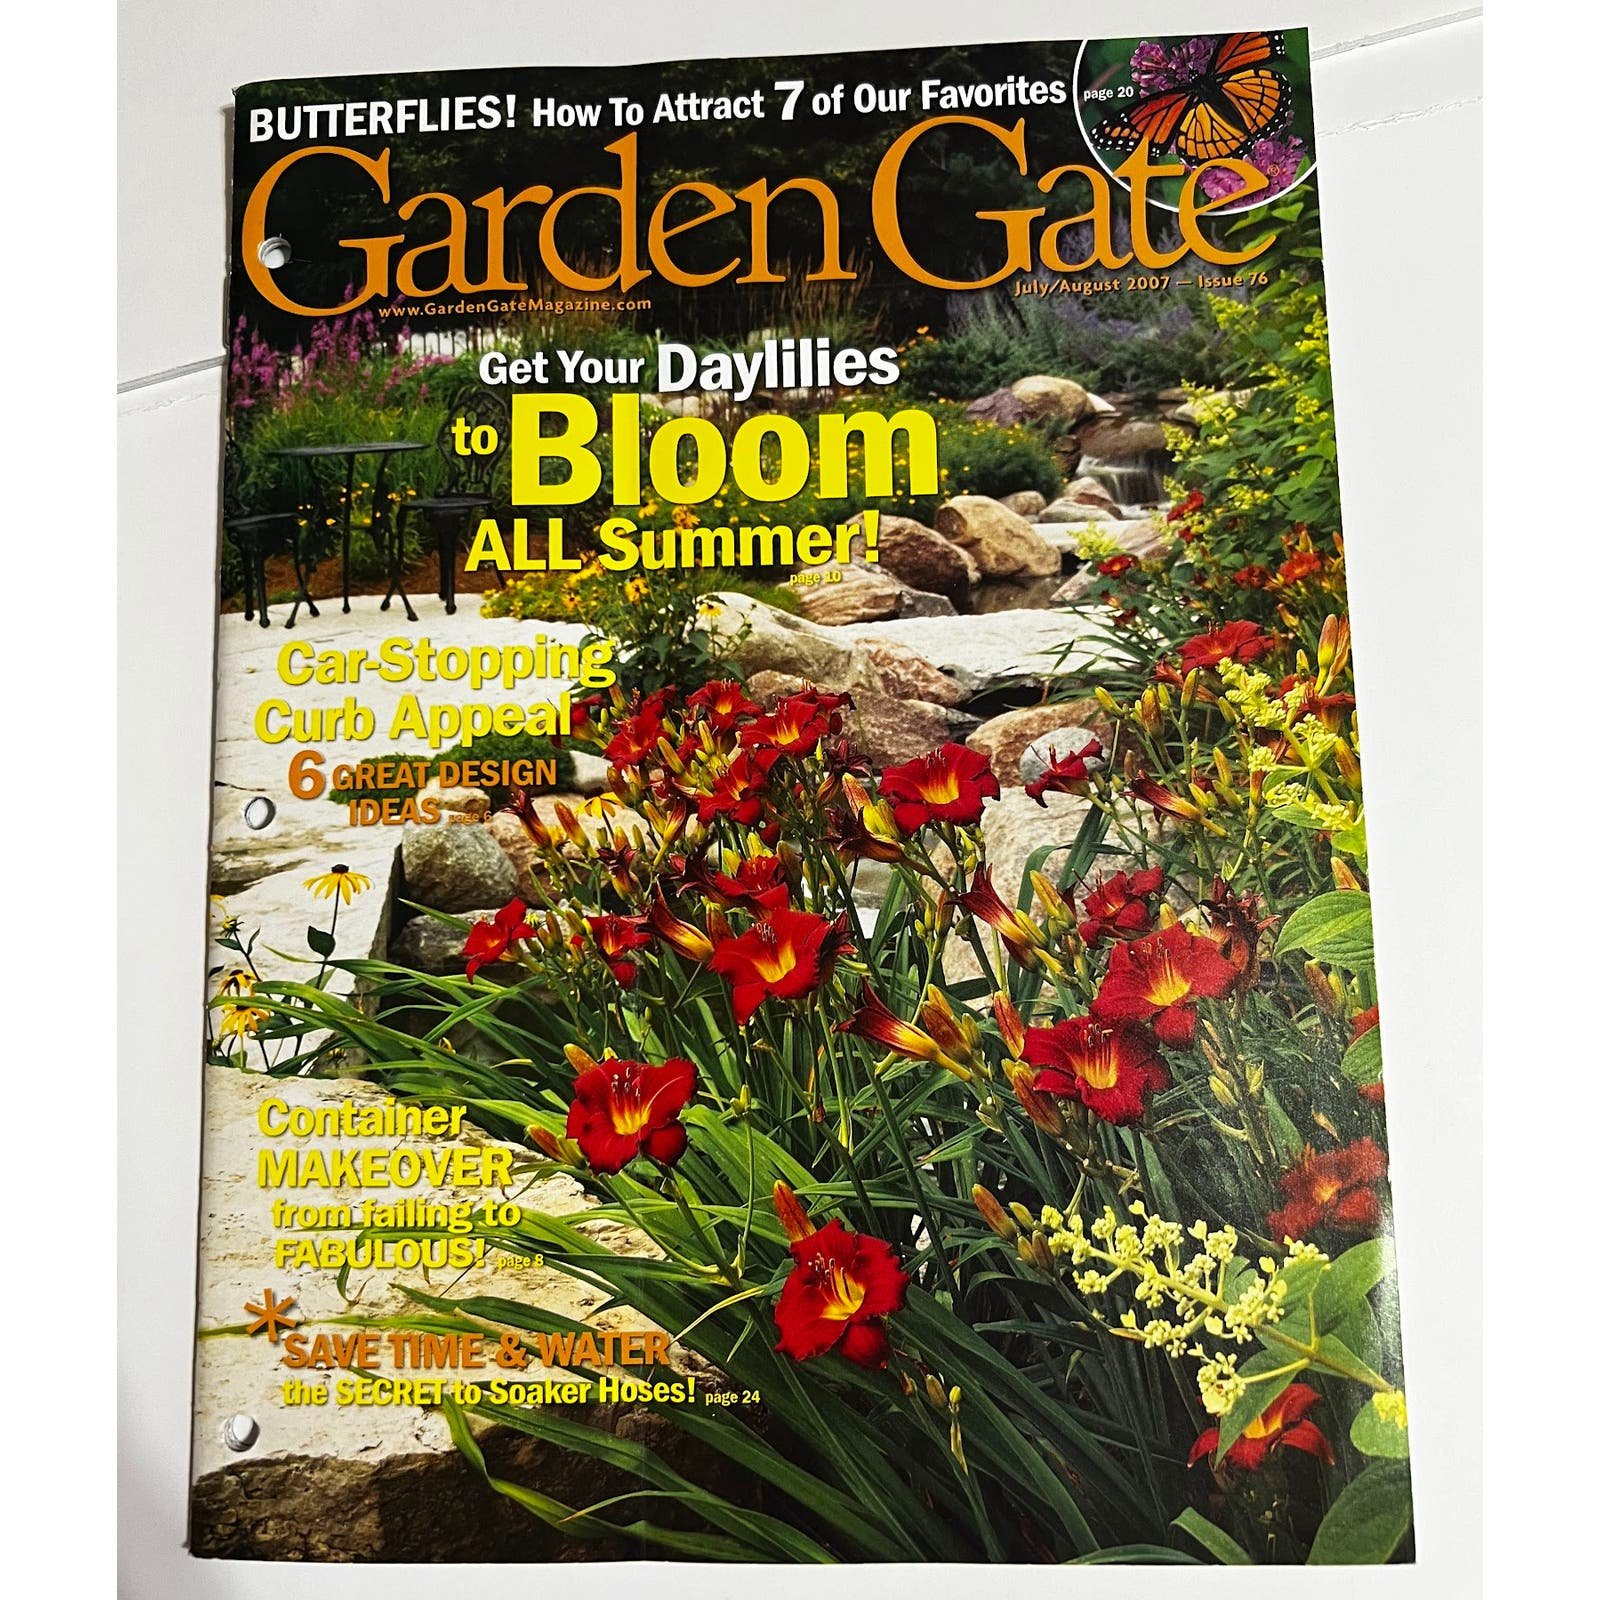 Garden Gate Gardening Back Issues July/August 2007 Issue 76 cXcoLDBNL